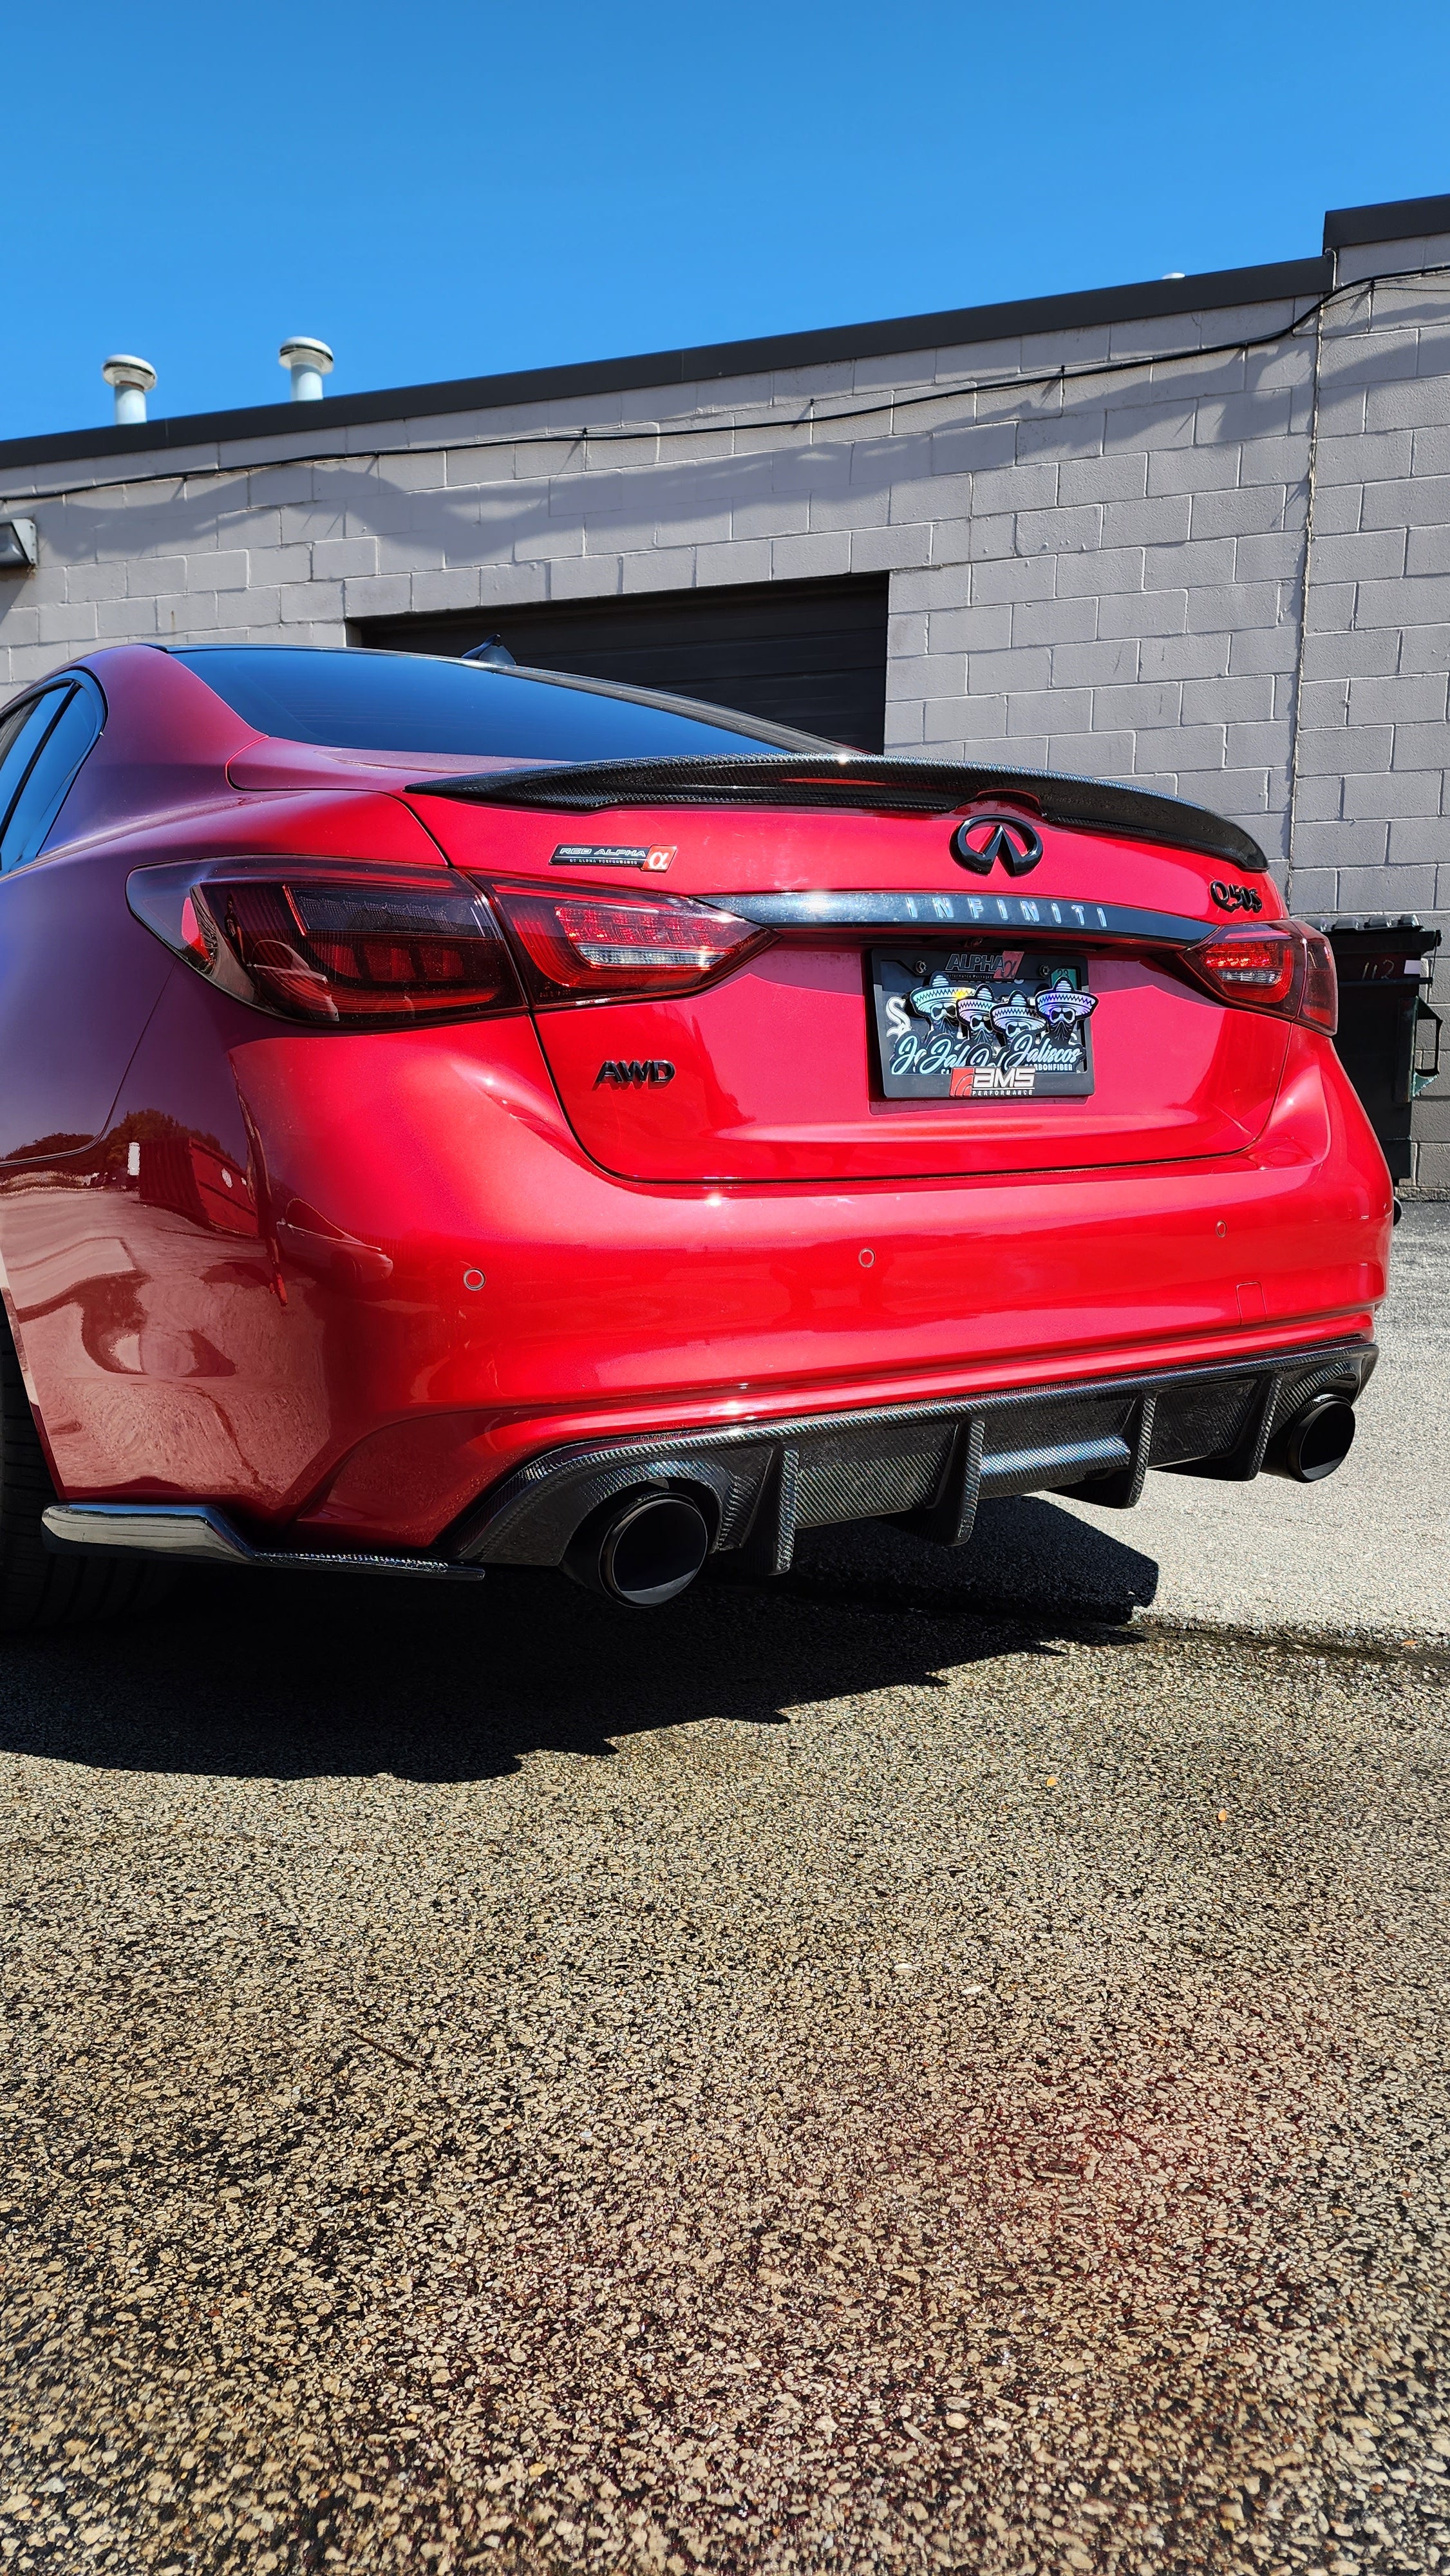 Red Infiniti Q50 2018 showcasing Jalisco's CF Carbon Fiber 'OG' Style Diffuser, captured in a wider angle." Red Q50 2018 with